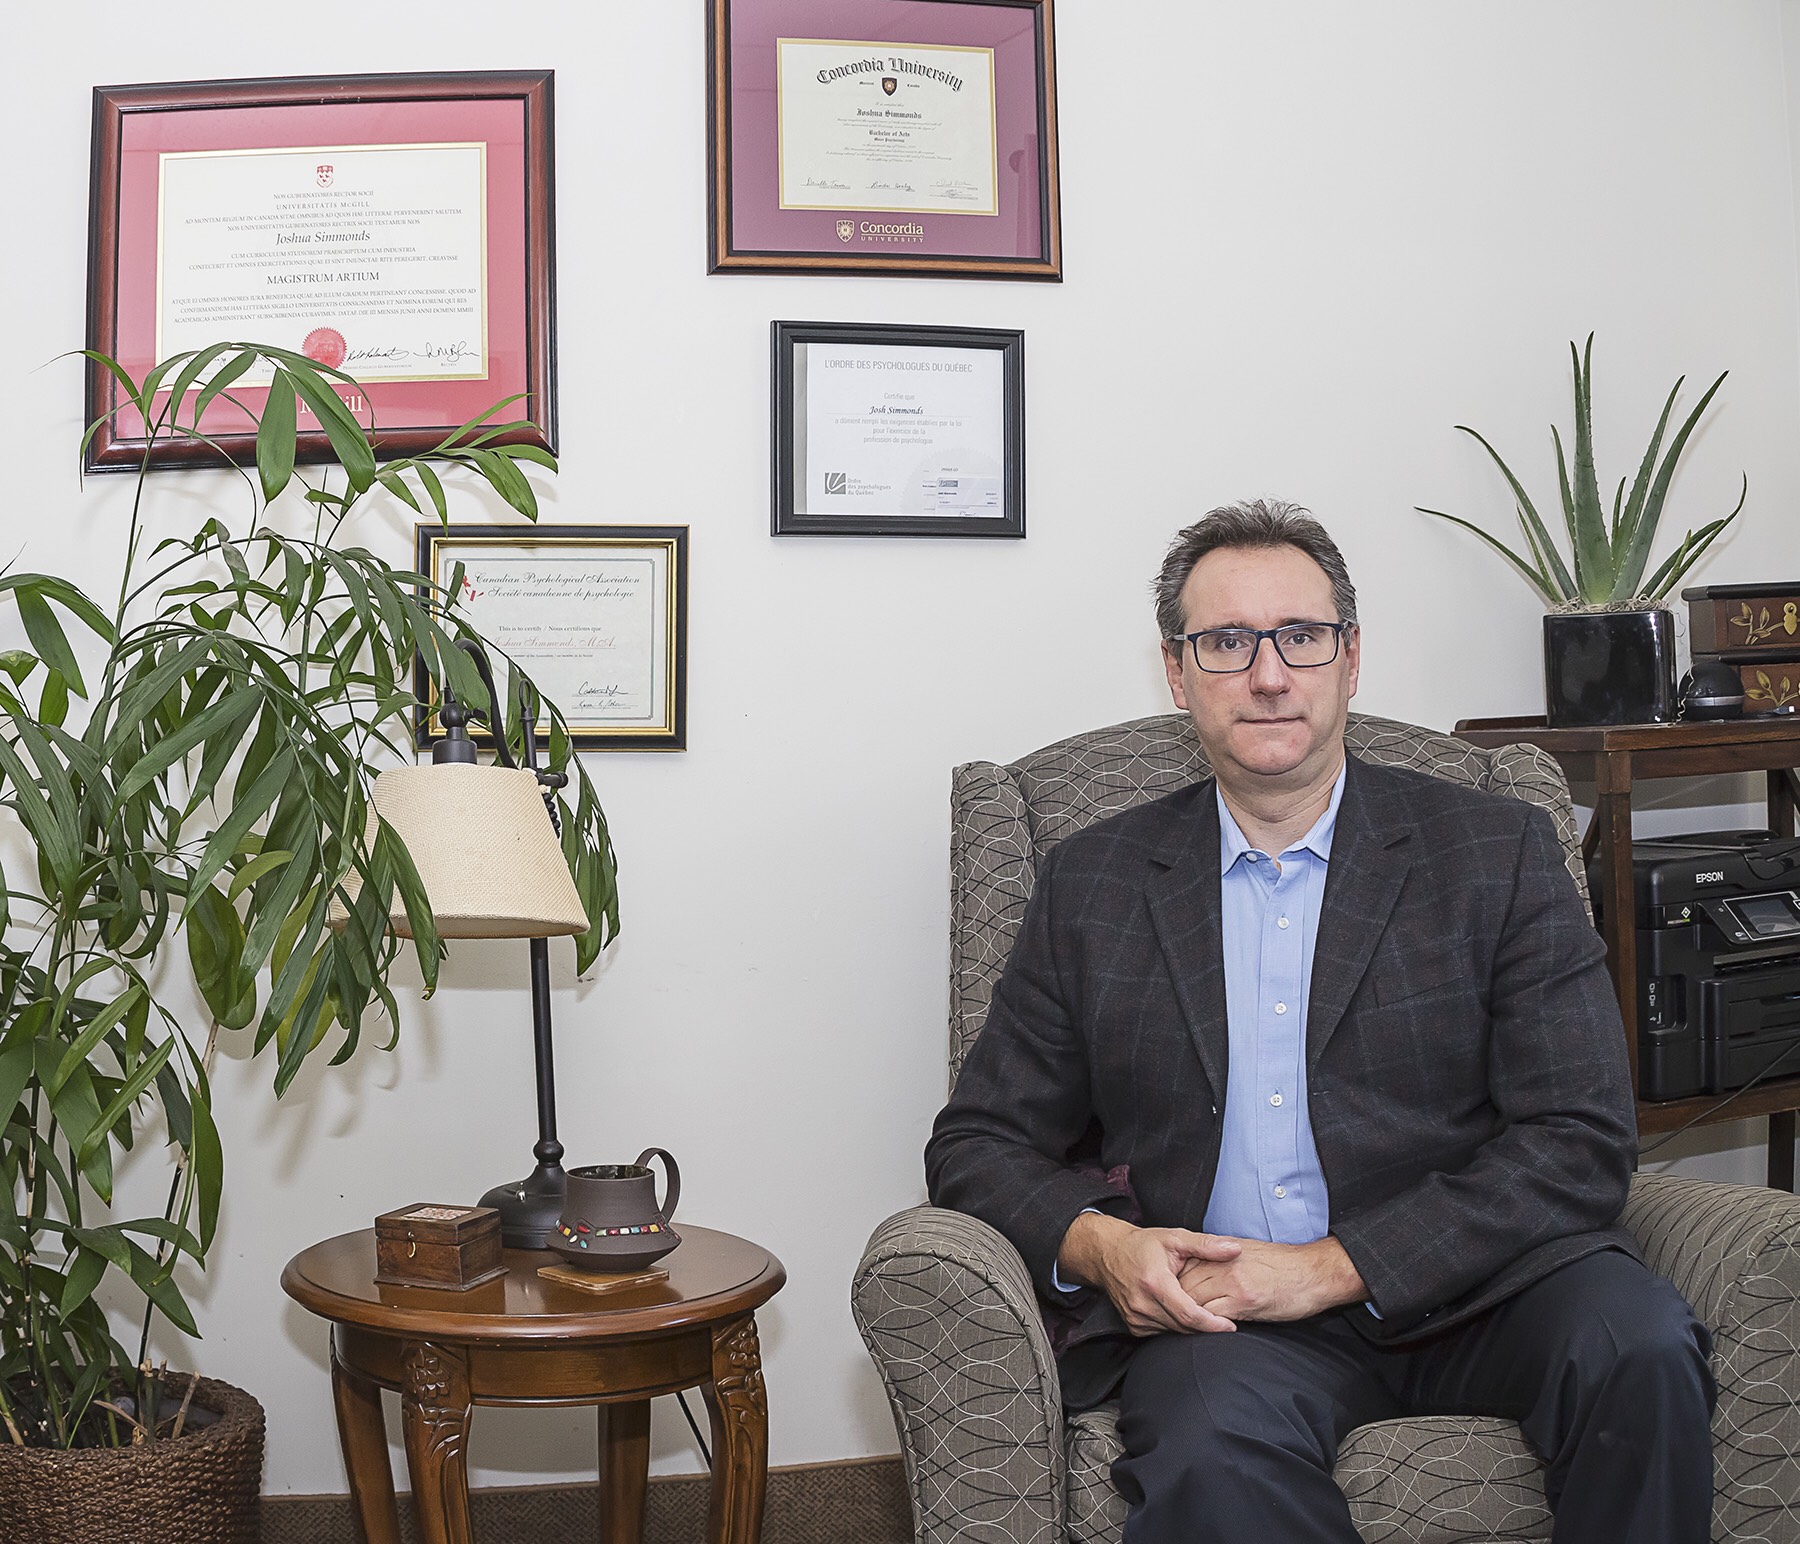 Joshua Simmonds, wearing a suit, sits in a chair in his office. There are certificates on the wall and plants and a coffee table beside him.